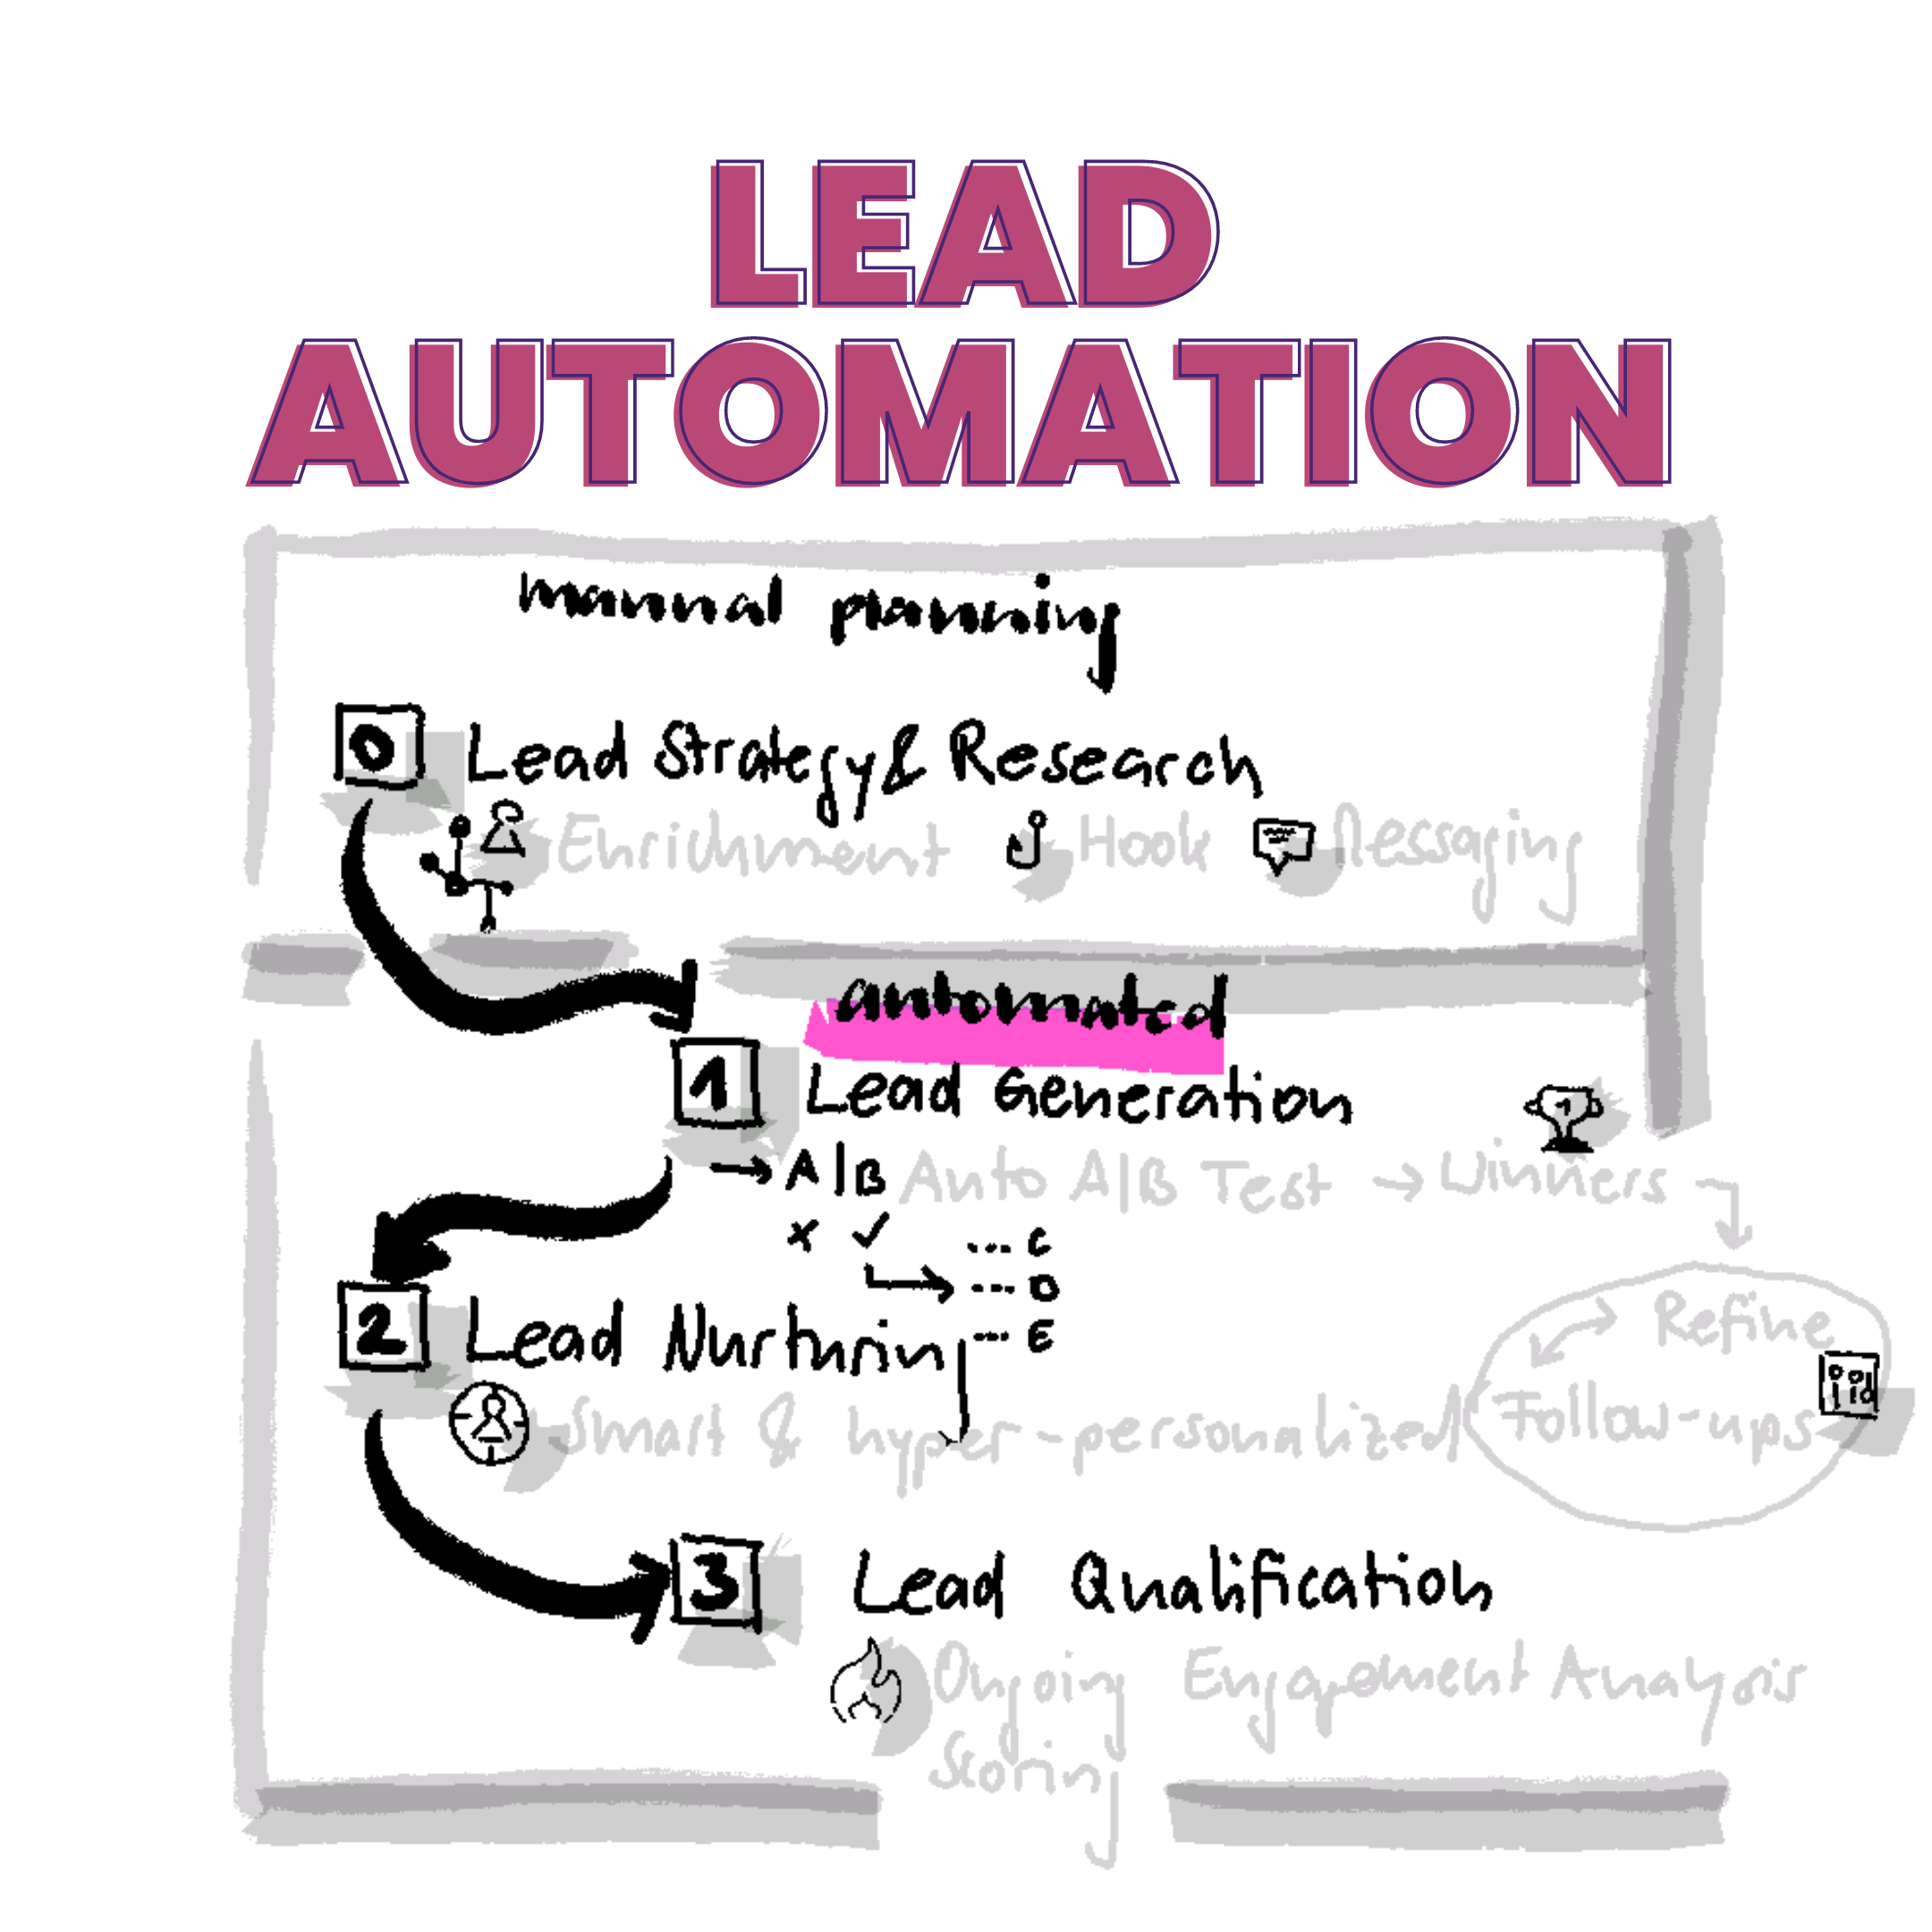 lead-automation-overview